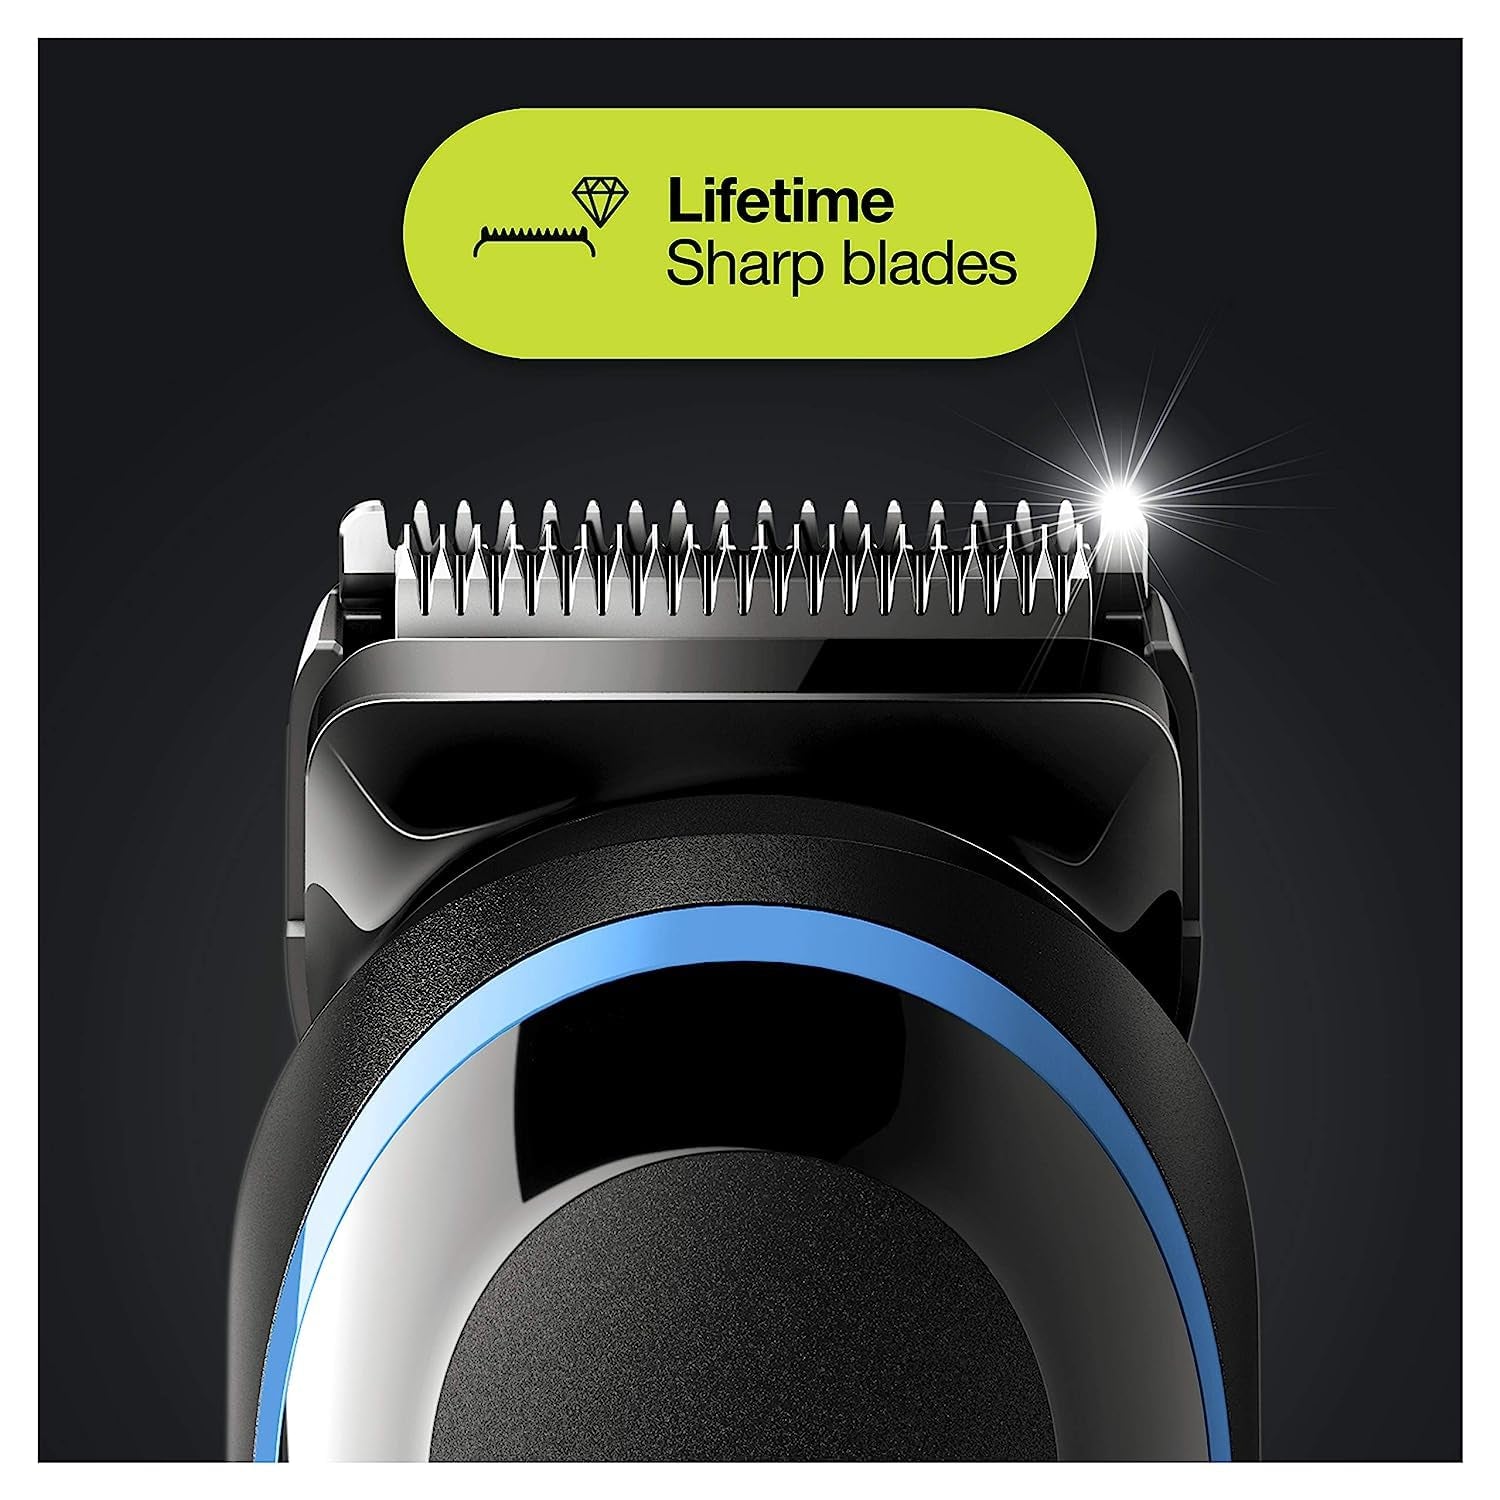 Hair Clippers for Men 9-In-1 Beard, Ear and Nose Trimmer, Mens Grooming Kit, Body Groomer, Cordless & Rechargeable with Gillette Proglide Razor, Black/Blue